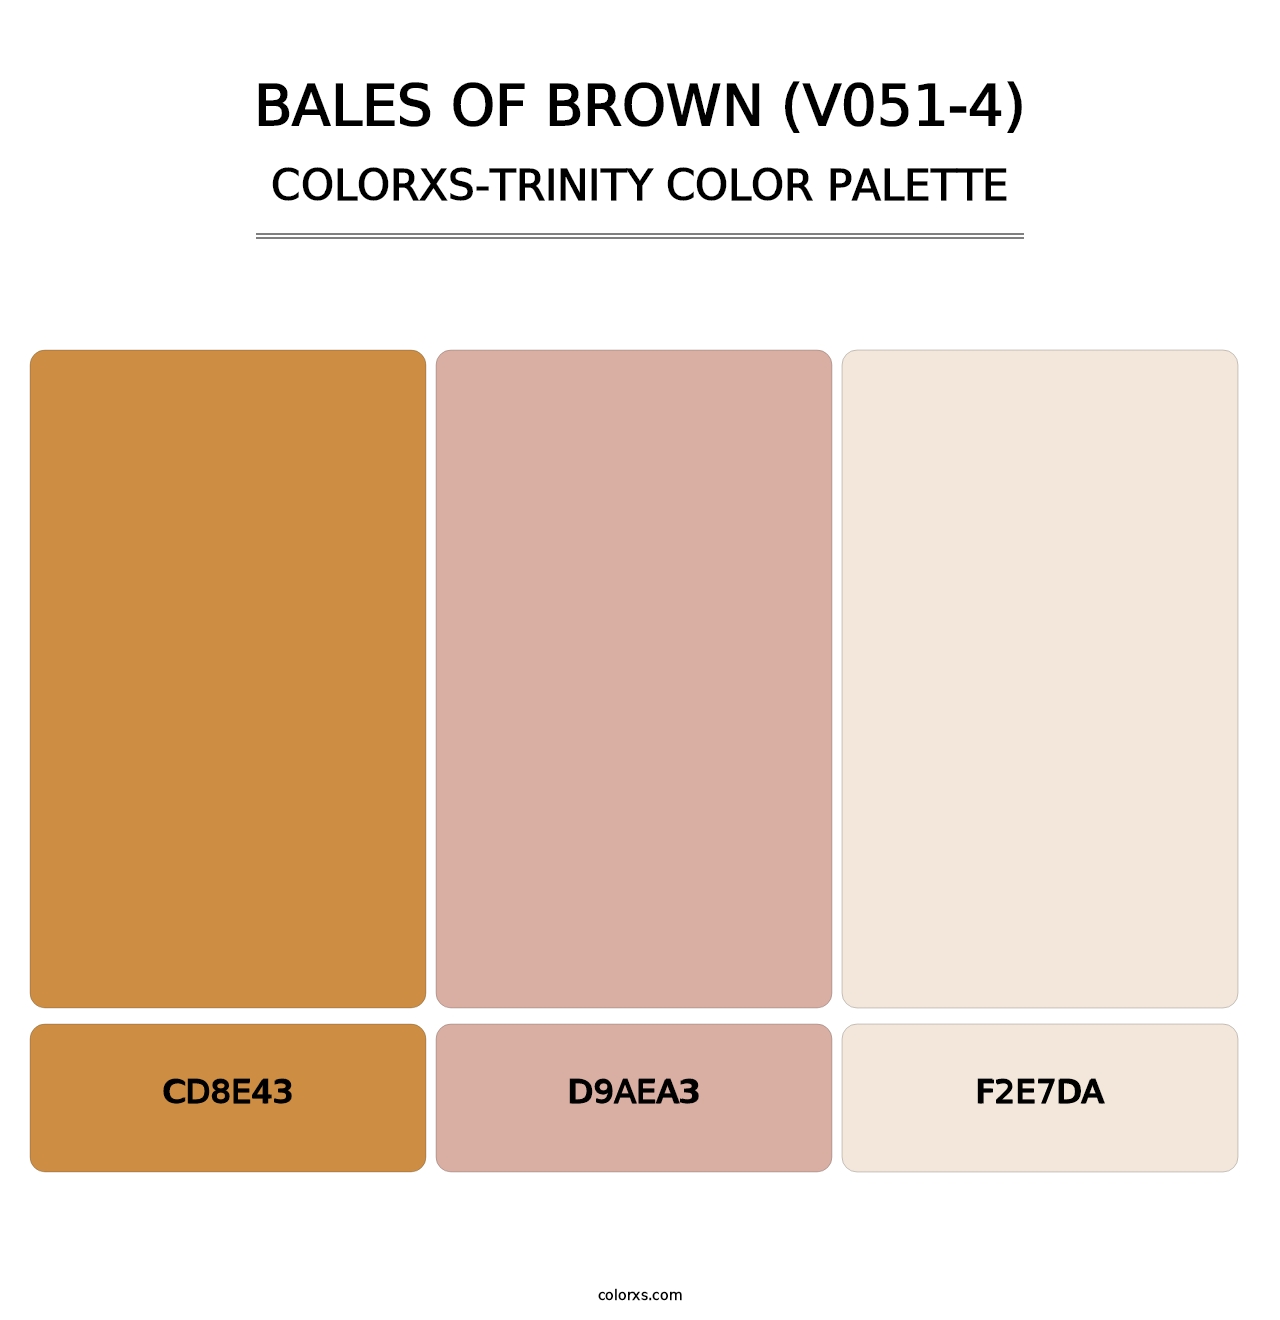 Bales of Brown (V051-4) - Colorxs Trinity Palette